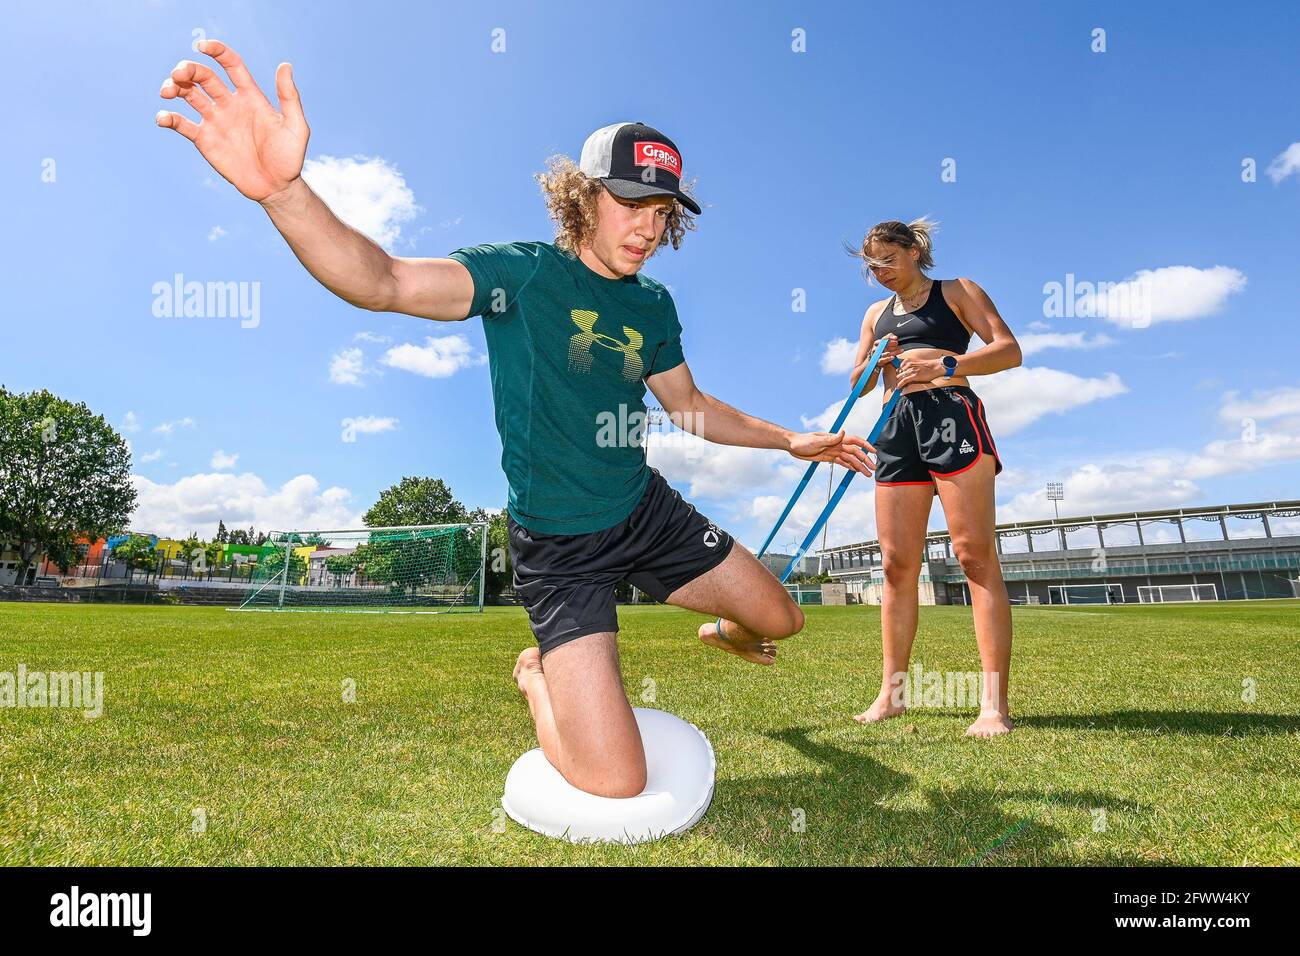 Belgian skier Sam Maes and Belgian skier Kim Vanreusel pictured during a training camp organized by the BOIC - COIB Belgian Olympic Committee, with at Stock Photo